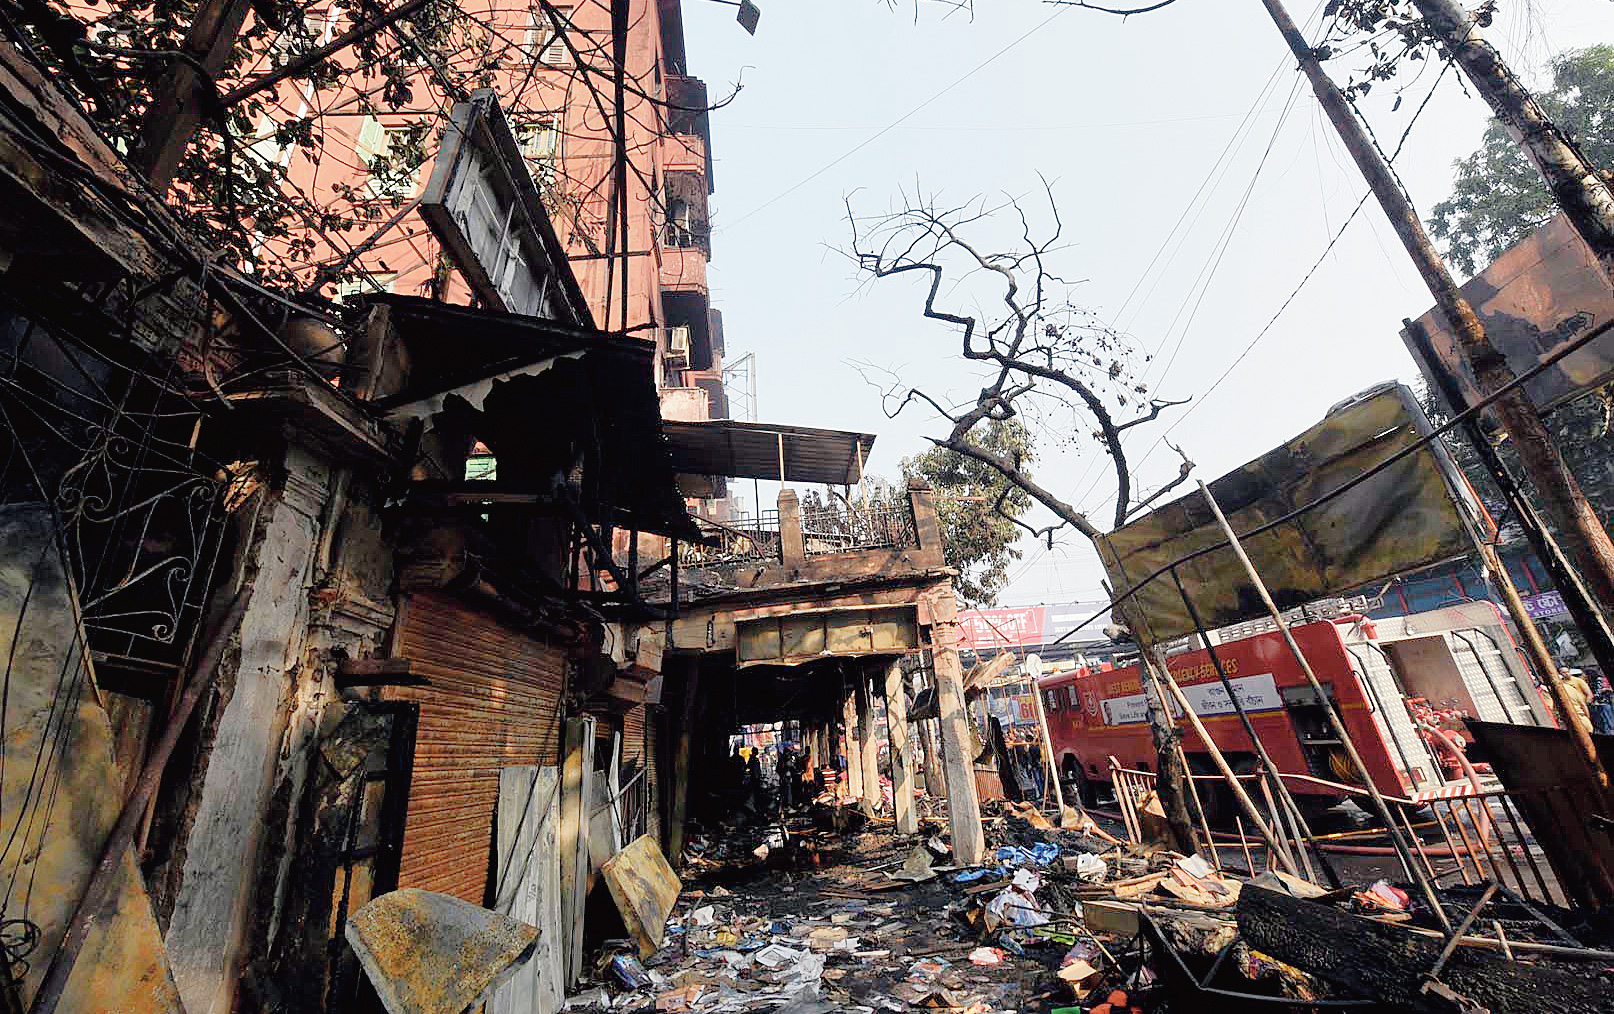 Remains of stalls that caught fire on the pavement in front of the Gariahat building that houses Traders Assembly and Adi Dhakeswari Bastralaya.